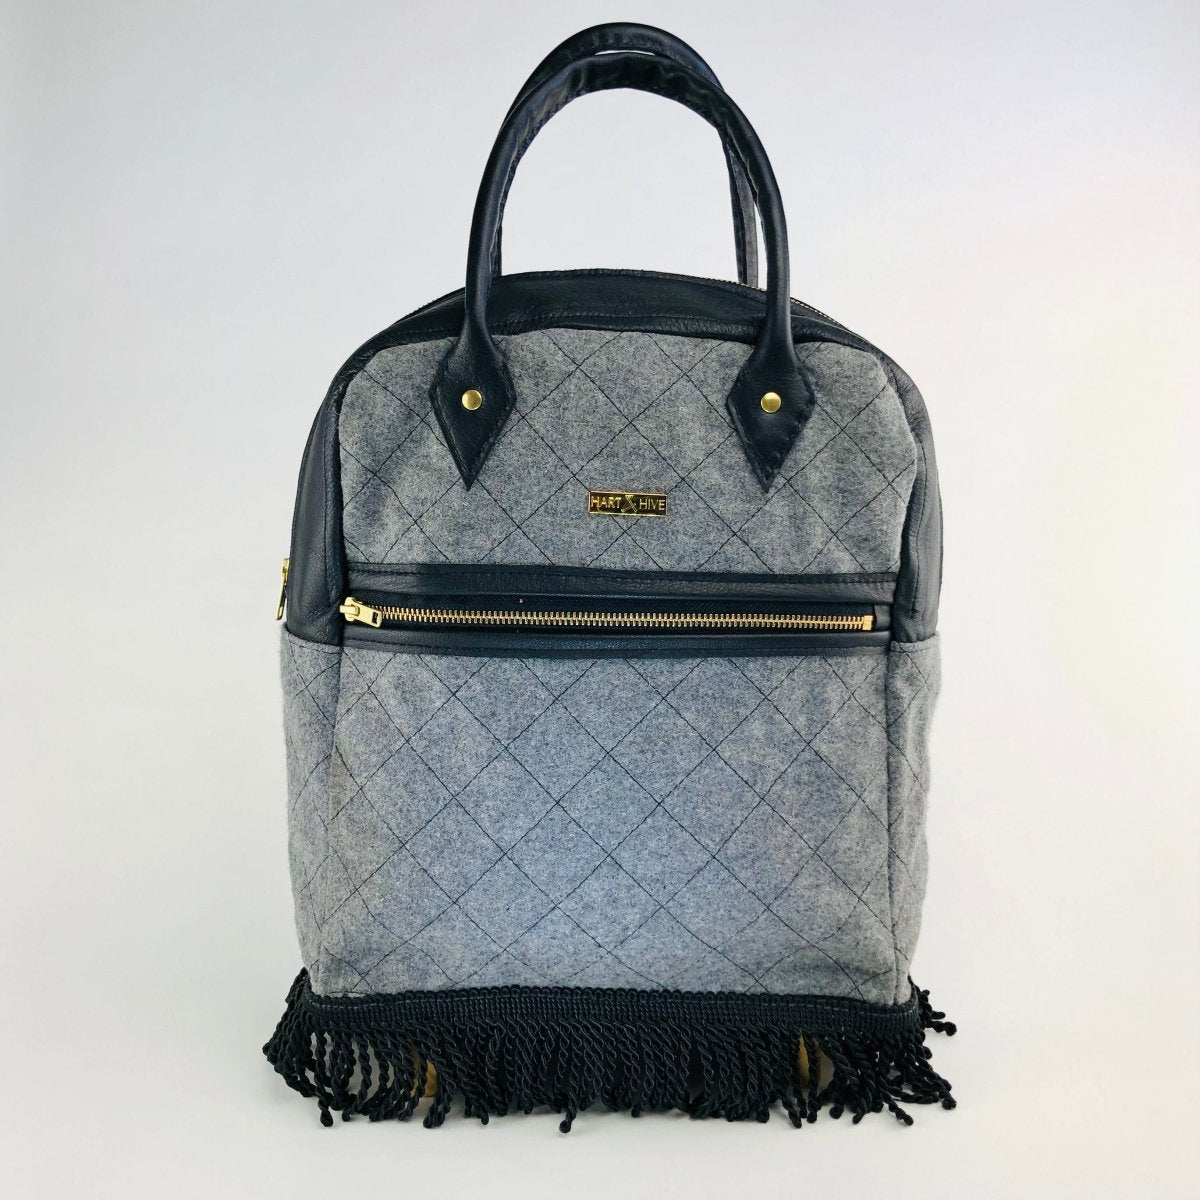 Grey Wool Carry-on Style Bag - Hart & Hive